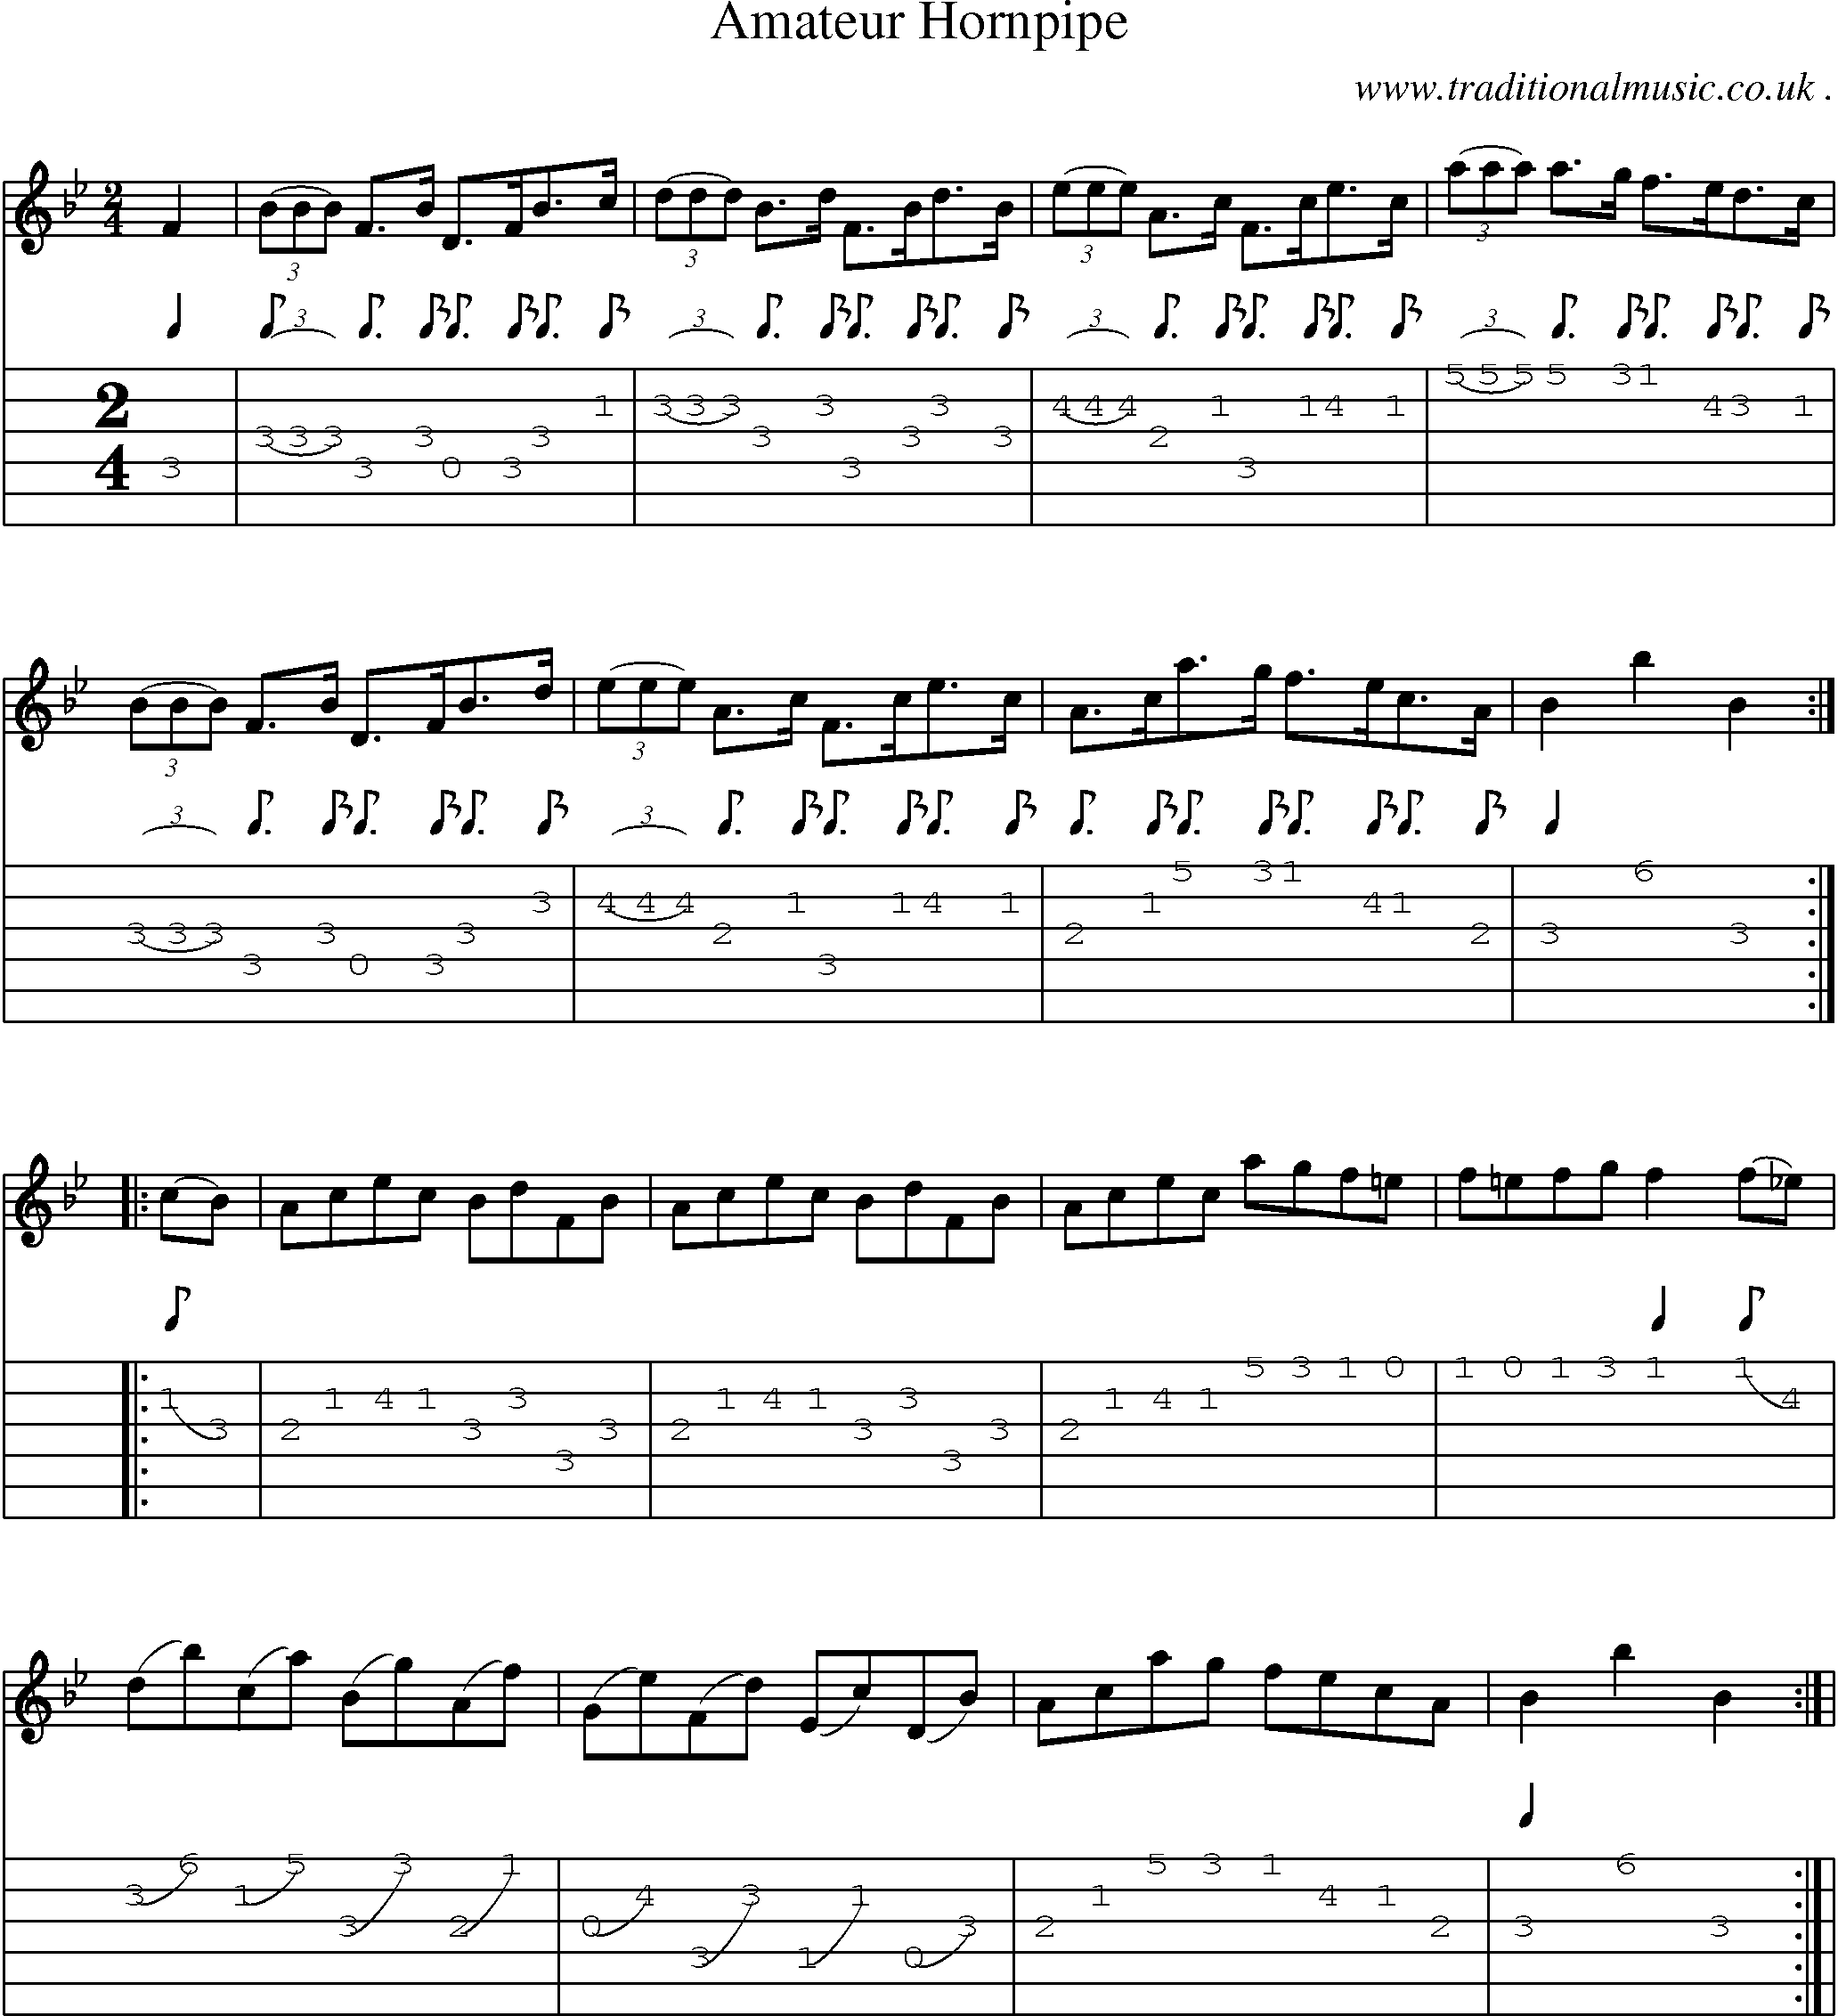 Sheet-Music and Guitar Tabs for Amateur Hornpipe